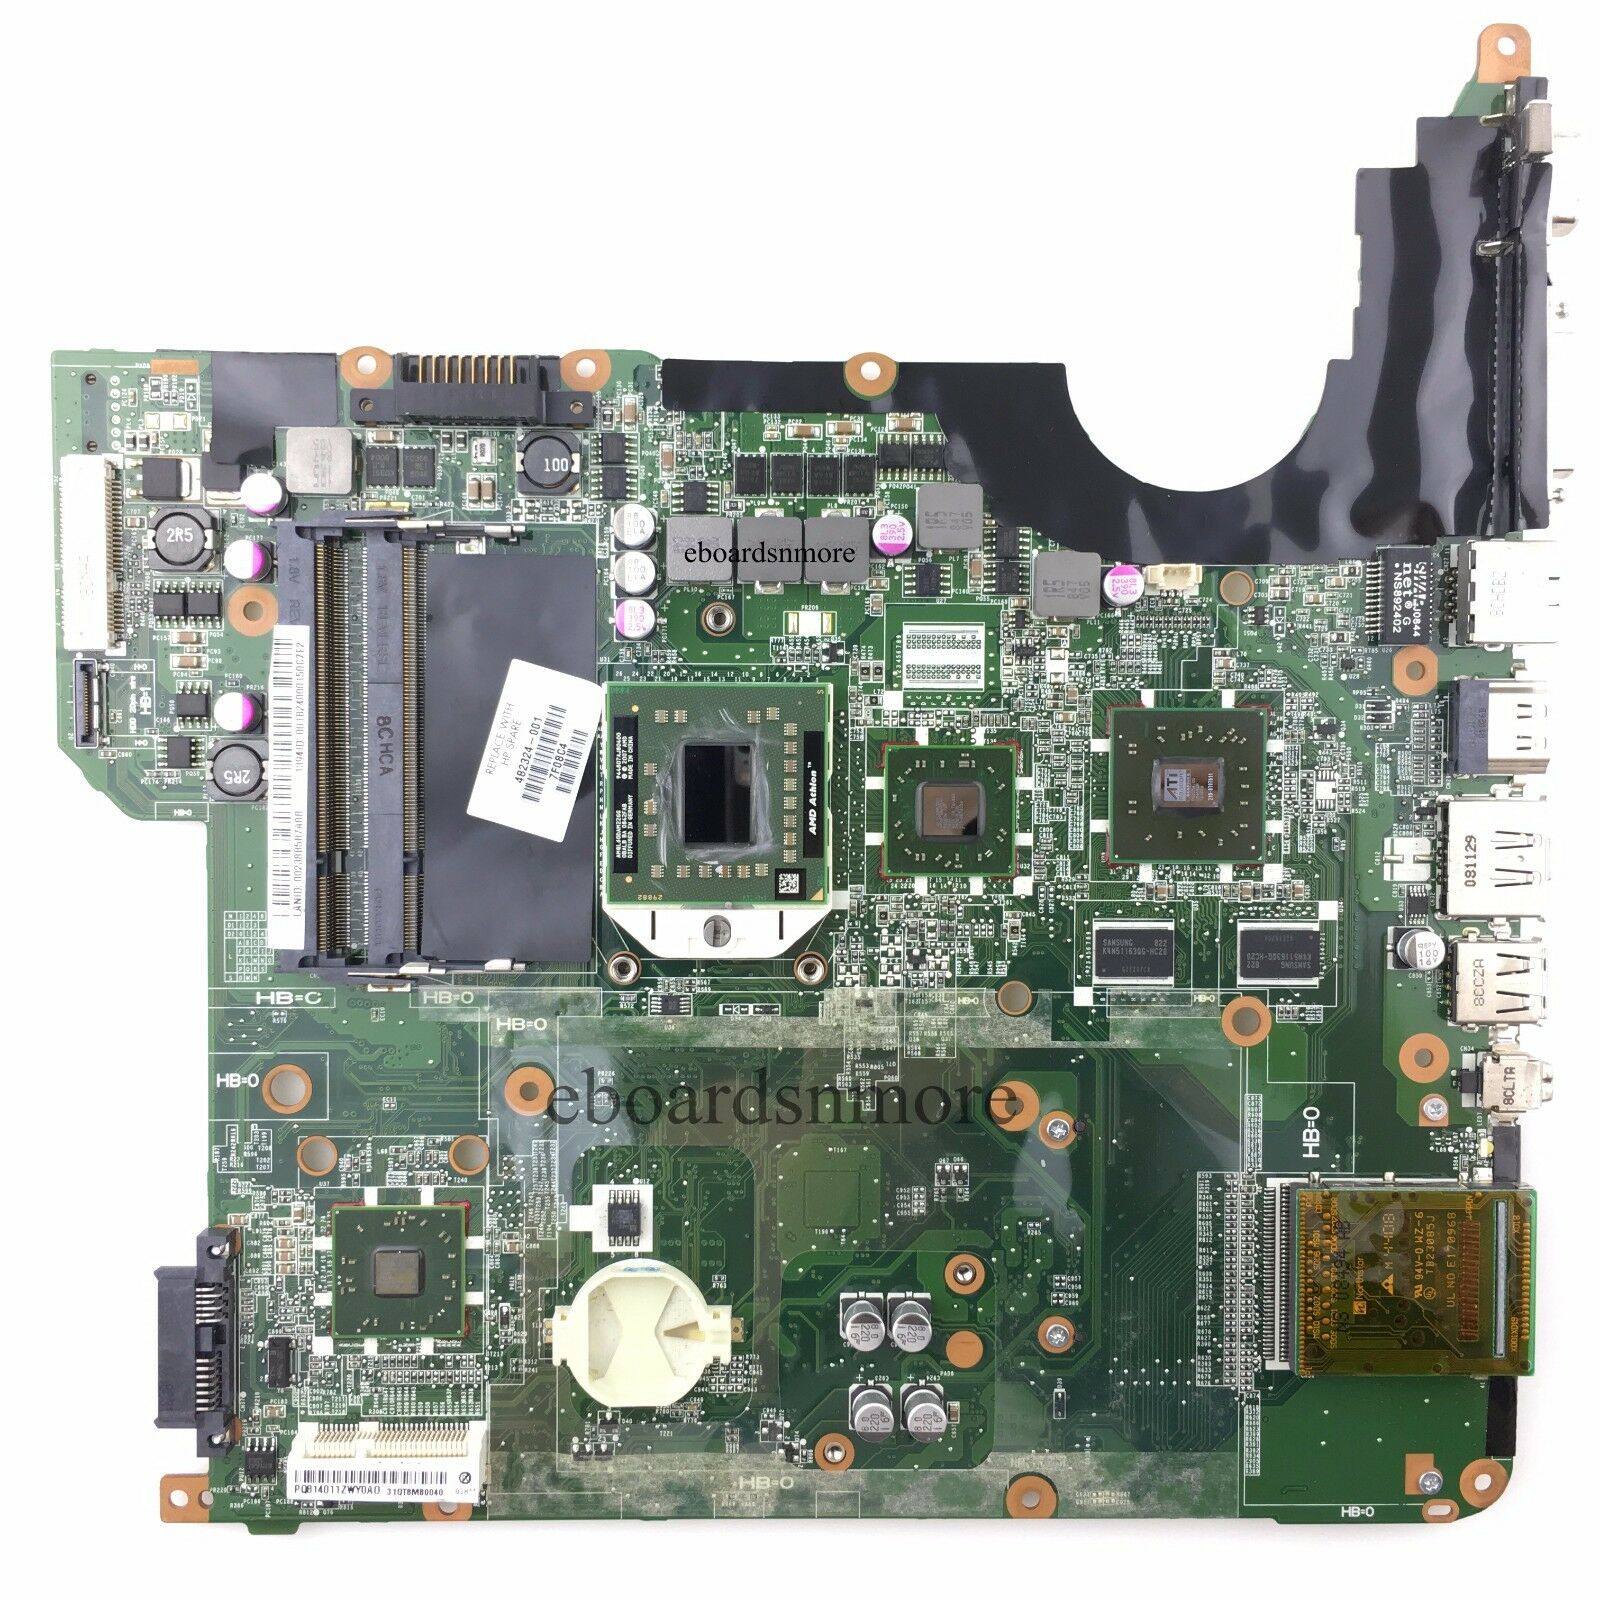 482324-001 AMD motherboard for HP DV5-1000 Laptops, ATI graphics Compatible CPU Brand: AMD Number of Memory